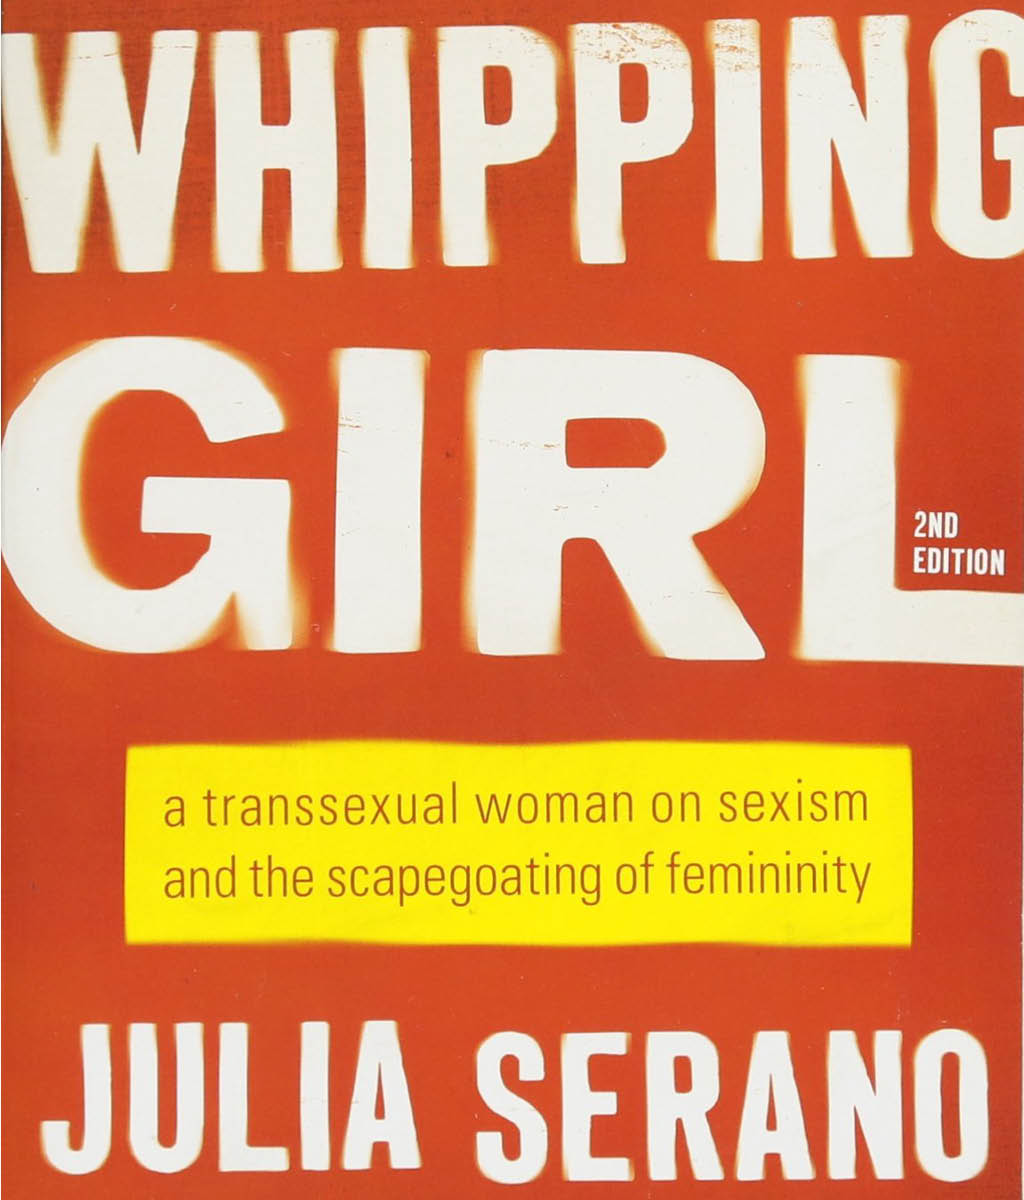 Whipping Girl: A transsexual woman on sexism and the scapegoating of femininity